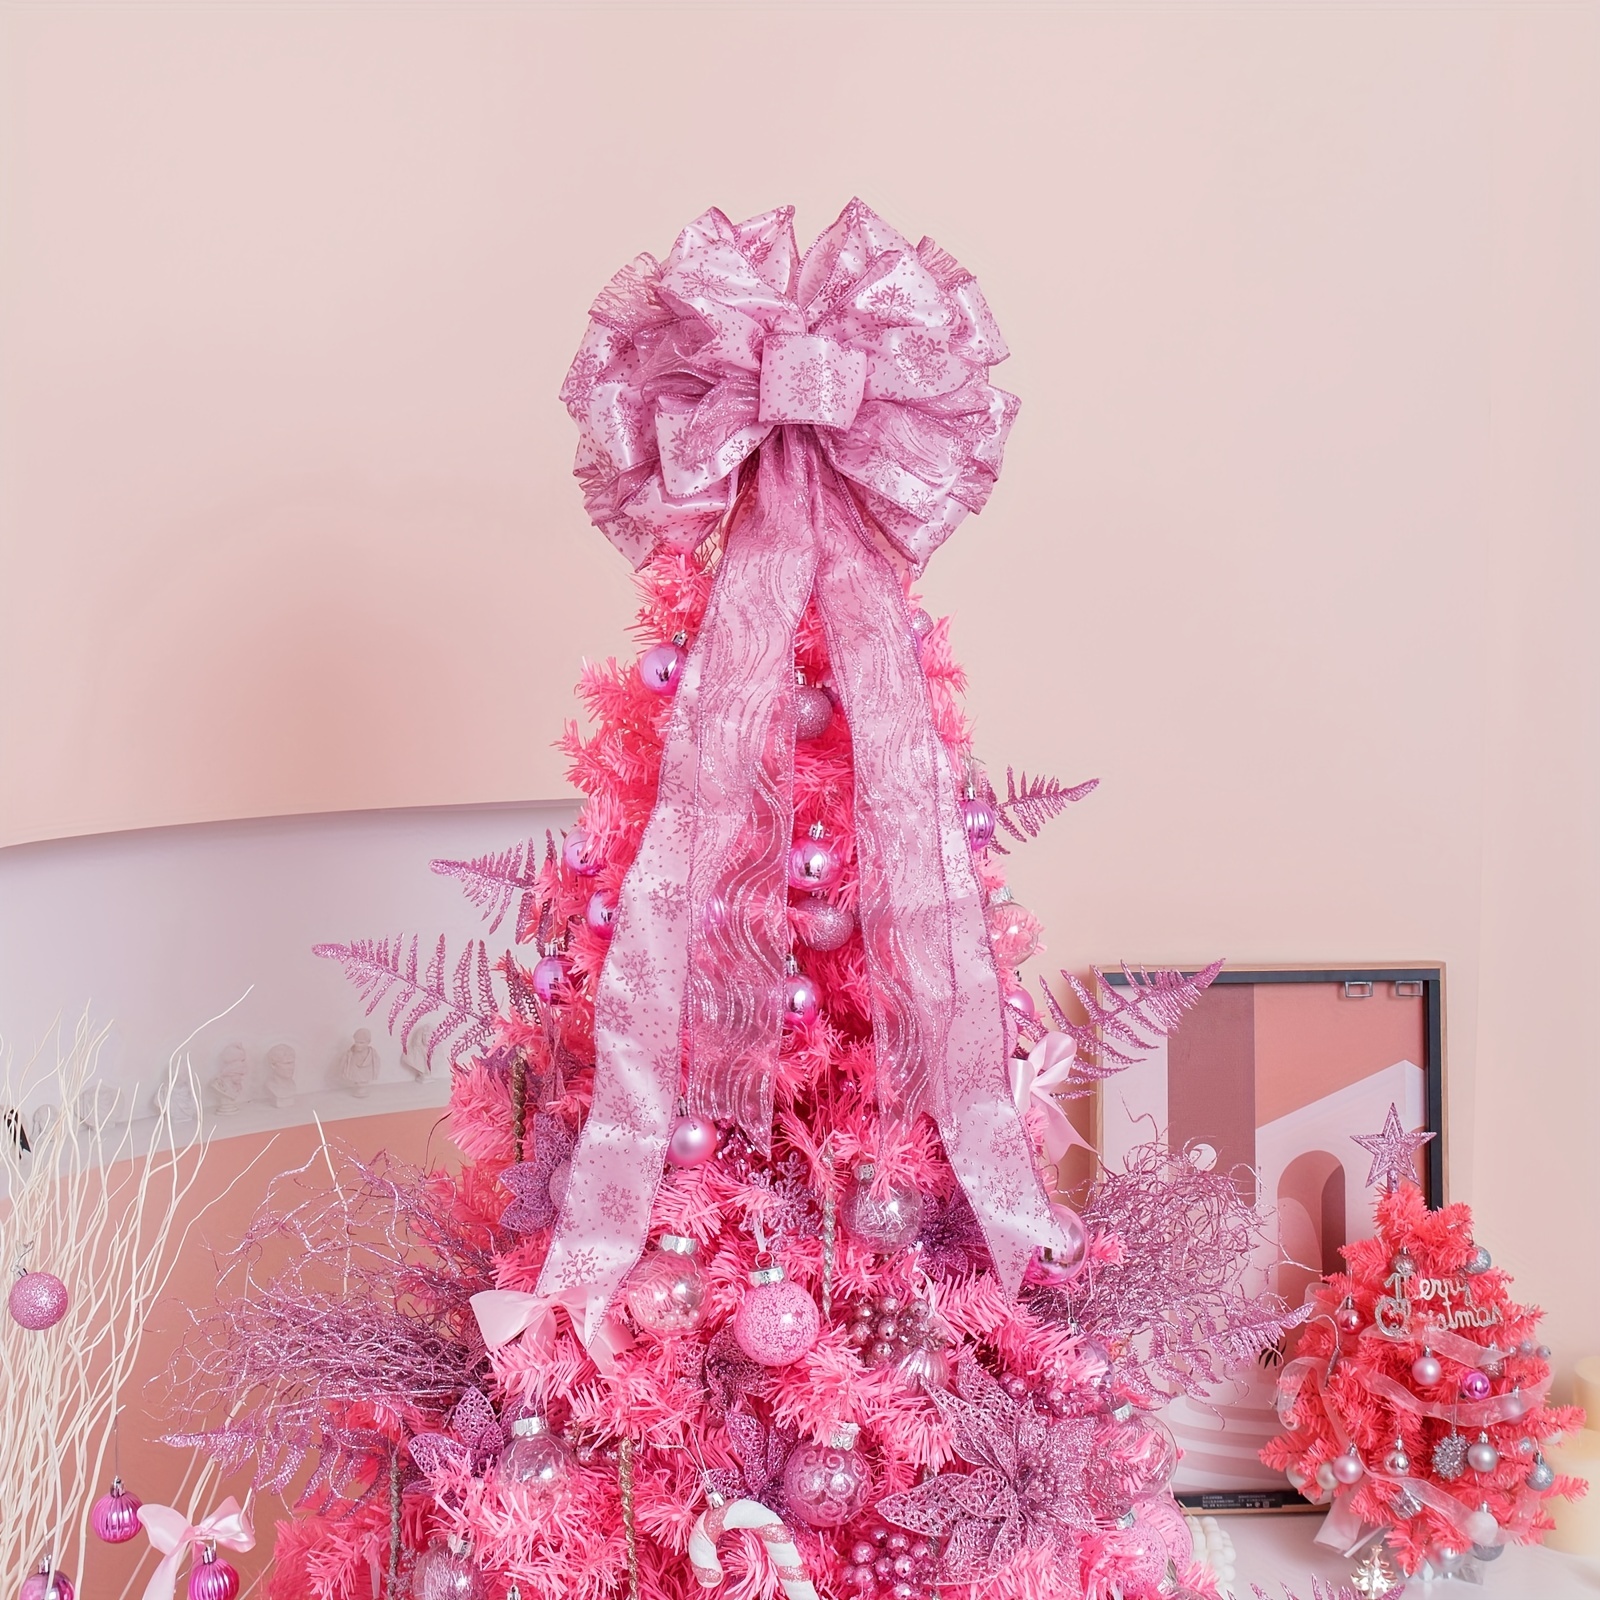 Pink Christmas Bows Decorations, 11 inchx 21.2 inch Large Christmas Tree Topper Bow for Xmas Home Decor, Size: 11 x 21.2